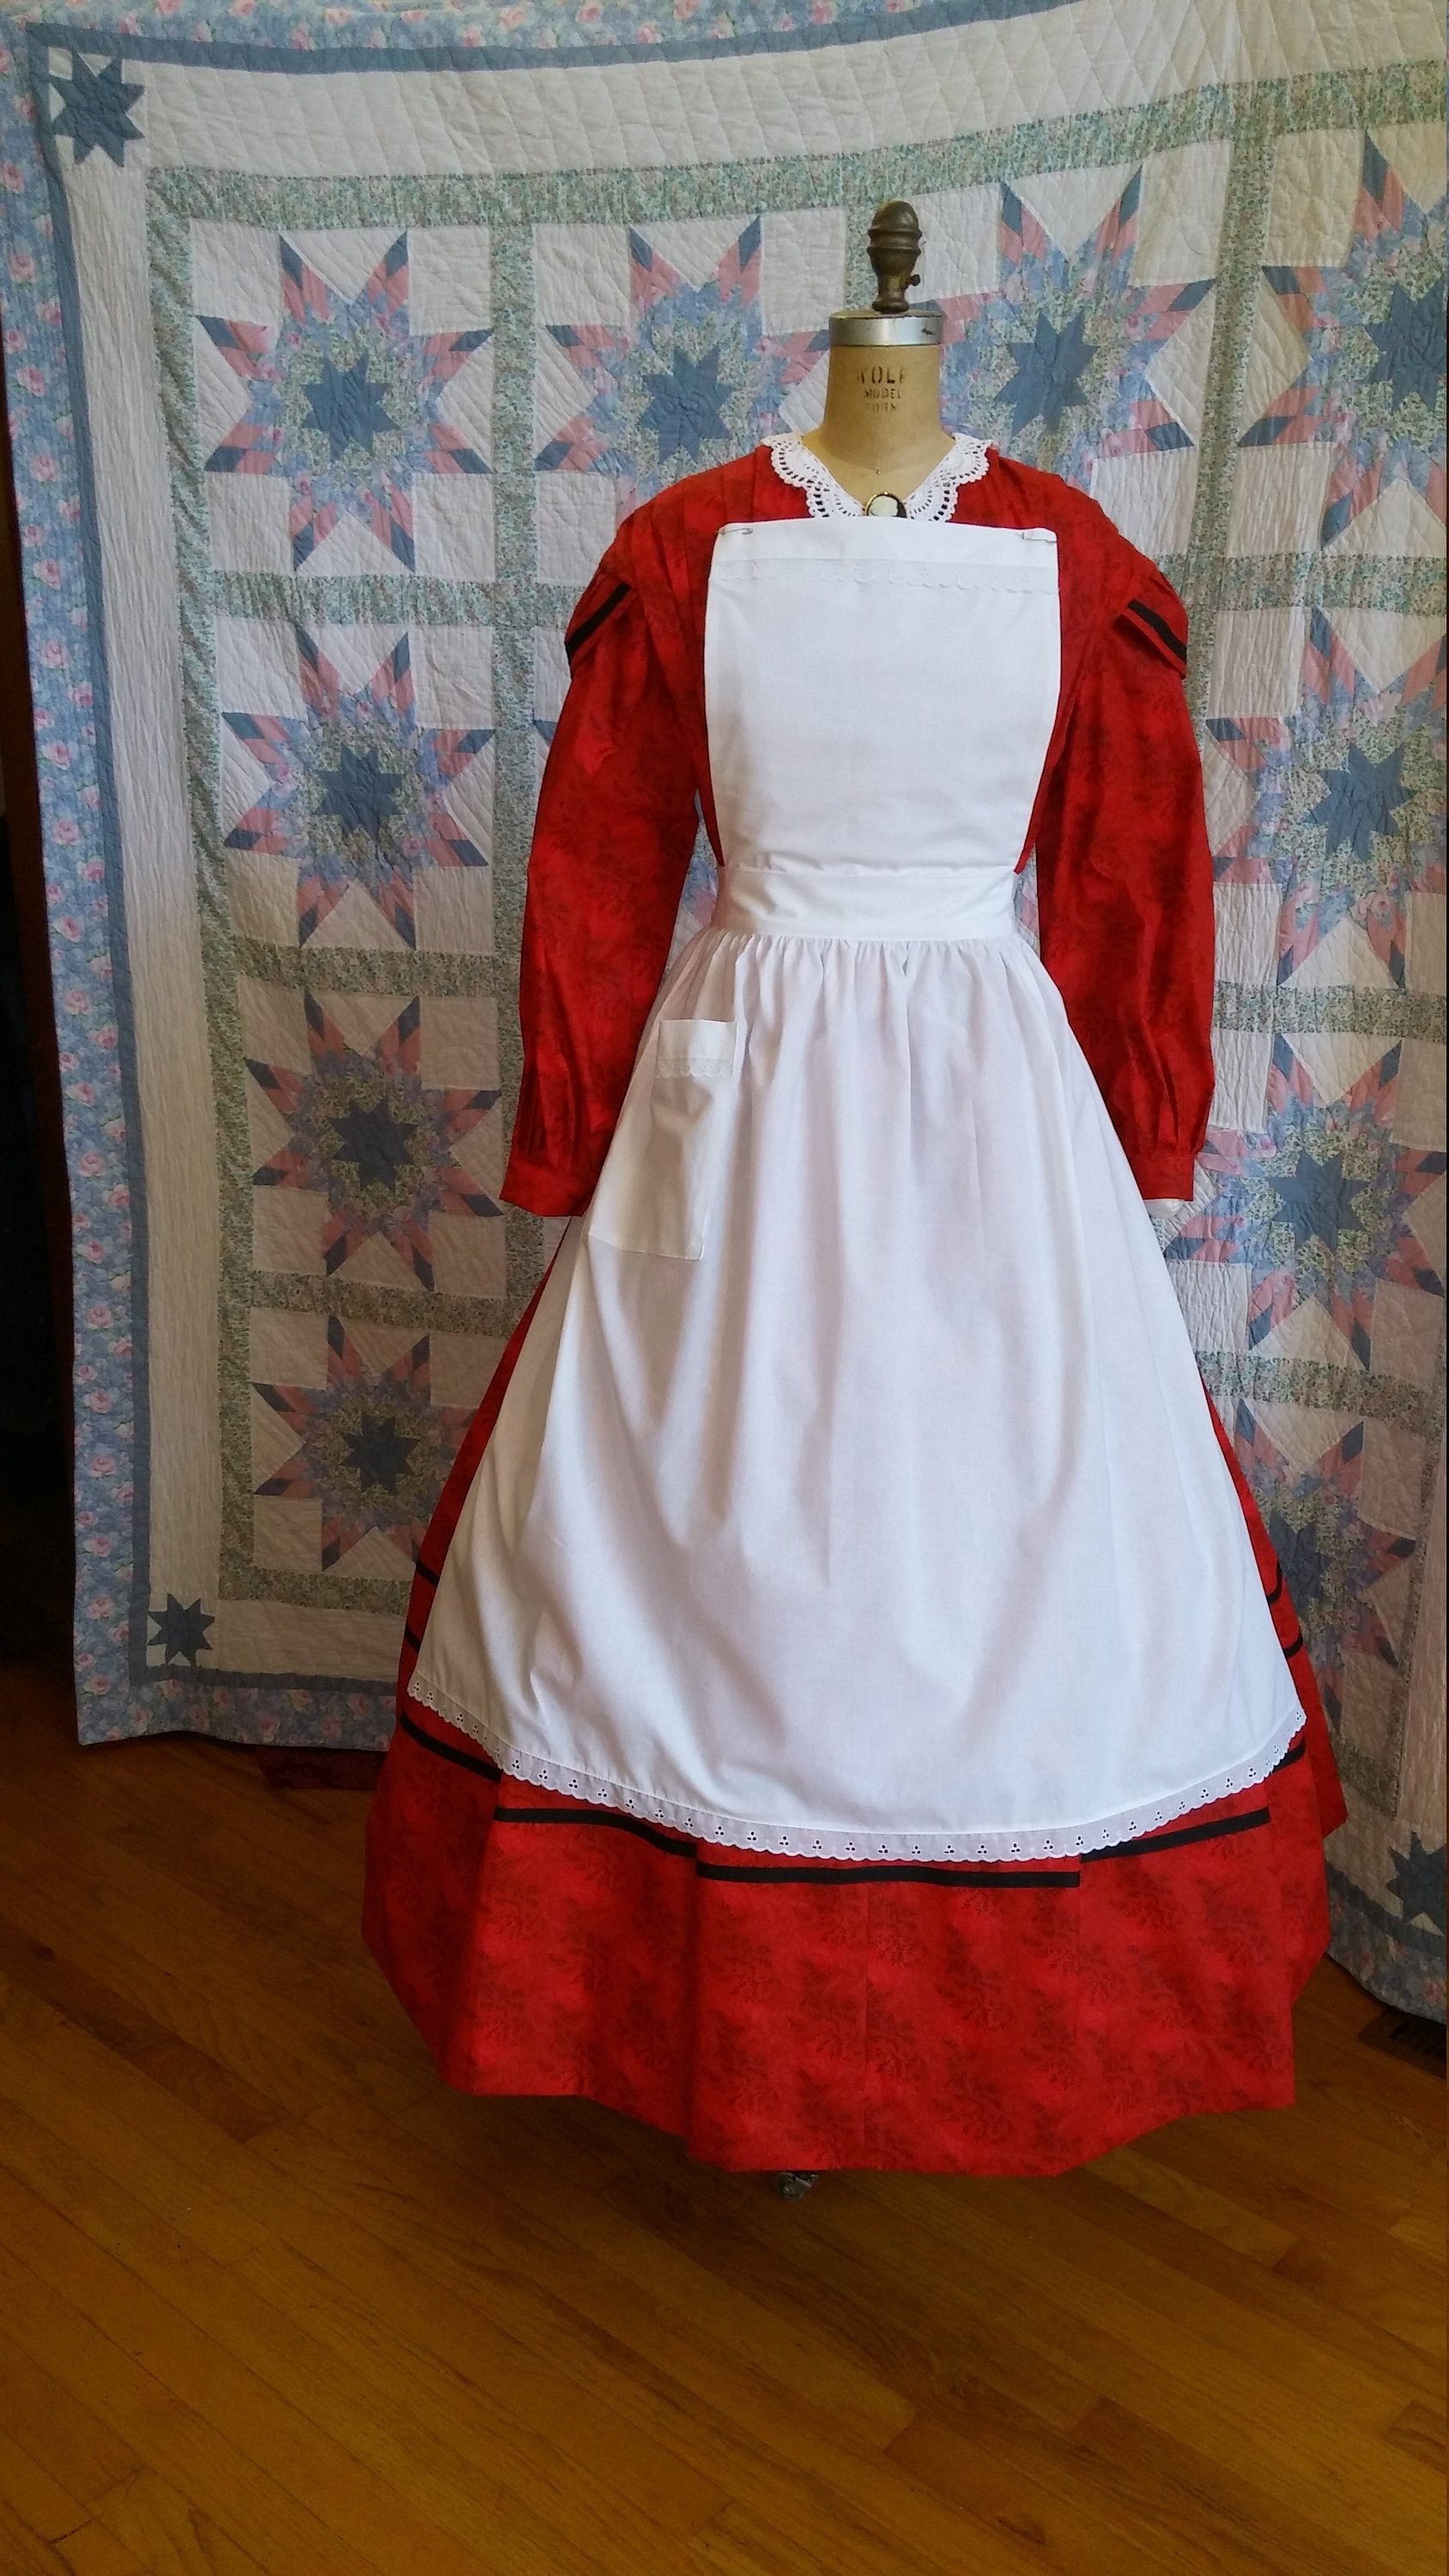 Women's Pinner Apron With Patch Pocket Regular or PLUS - Etsy